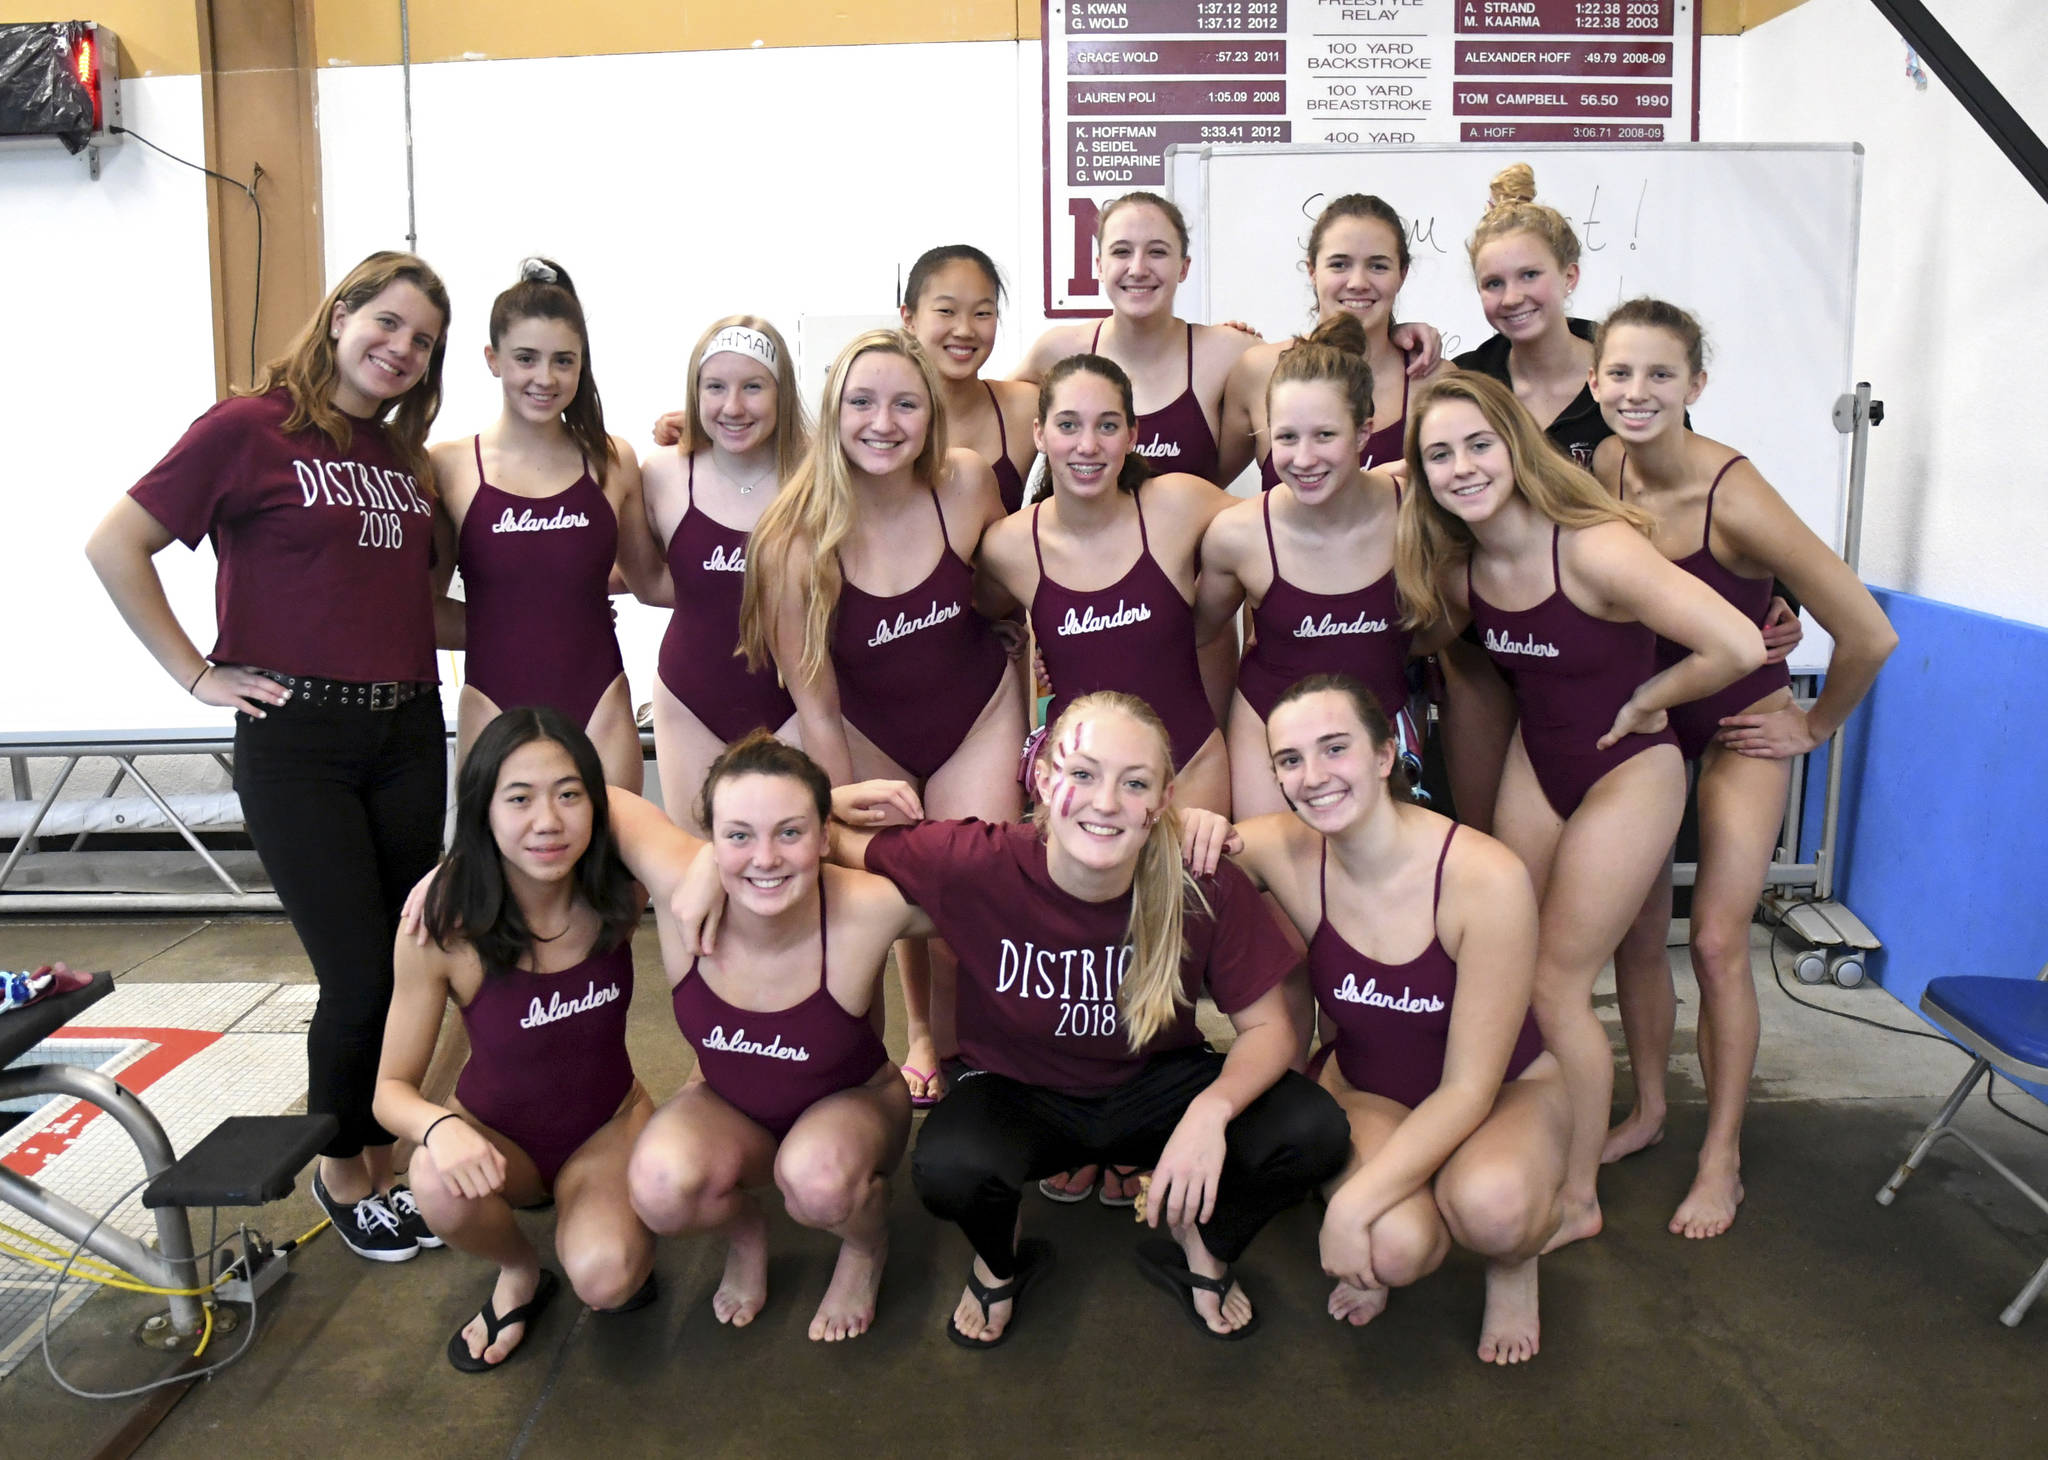 The Mercer Island Islanders girls swim team earned third place as a team at the Class 3A SeaKing district championships on Nov. 3 at Mary Wayte Pool on Mercer Island. The 200 medley relay team consisting of Alex Williams, Grace Olsen, Cayla Prophater and Julia Williamson captured fourth place. The 200 free relay team of Ellie Bailey, Annie Pearse, Williamson and Olsen earned fifth place. The 400 free relay team of Hailey Vandenbosch, Prophater, Pearse and Bailey captured fifth place.                                Islanders’ junior Sophia McGuffin earned first place in the diving portion of the meet. Bailey earned eighth place in the 50 free and 10th place in the 100 free. Sophomore Grace Lennington captured 10th place in the 500 free. Senior Chloe Mark earned ninth place in the 200 free and sixth place in the 500 free. Olsen finished in ninth place in the 200 IM and sixth place in the 100 breaststroke. Pearse registered a third-place finish in the 50 free and third place in the 100 free. Prophater finished in fifth place in the 200 IM and third place in the 500 free. Mira Tang captured ninth place in the 100 back. Vandenbosch earned 10th place in the 200 free and ninth place in the 100 fly. Williams finished in sixth place in the 100 back. Williamson earned ninth place in the 50 free and eighth place in the 100 free. Sophomore Katie Williamson finished in fifth place in the 100 back. Photo courtesy of Allison Nelson